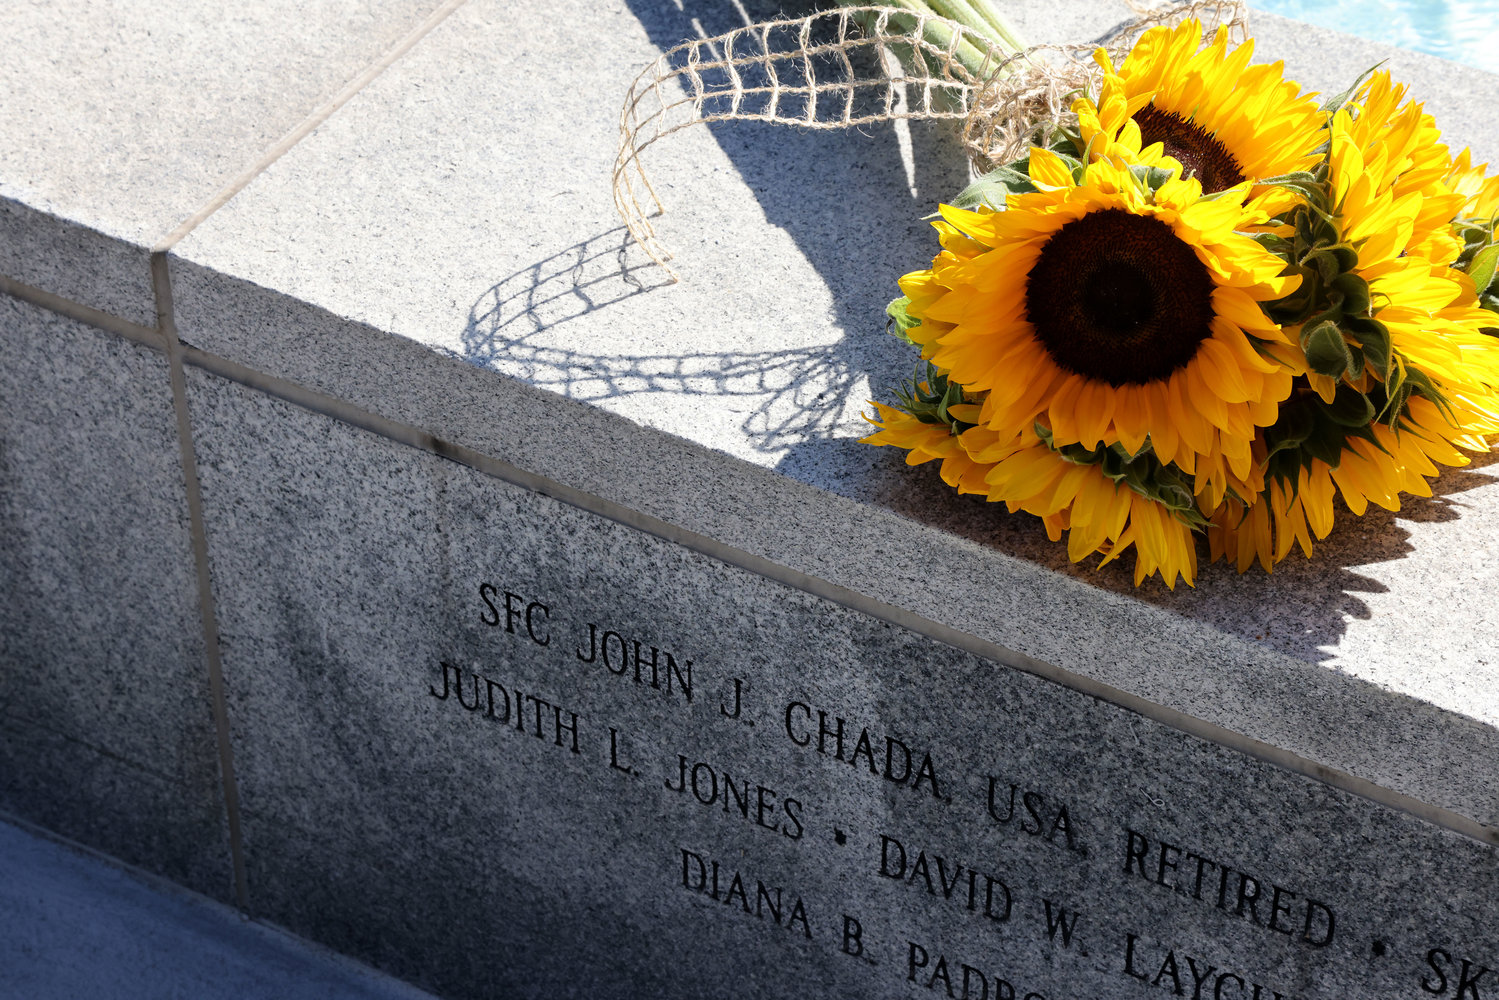 Flowers are placed on a memorial in honor of a Prince William County resident who died on Sept. 11, 2001.